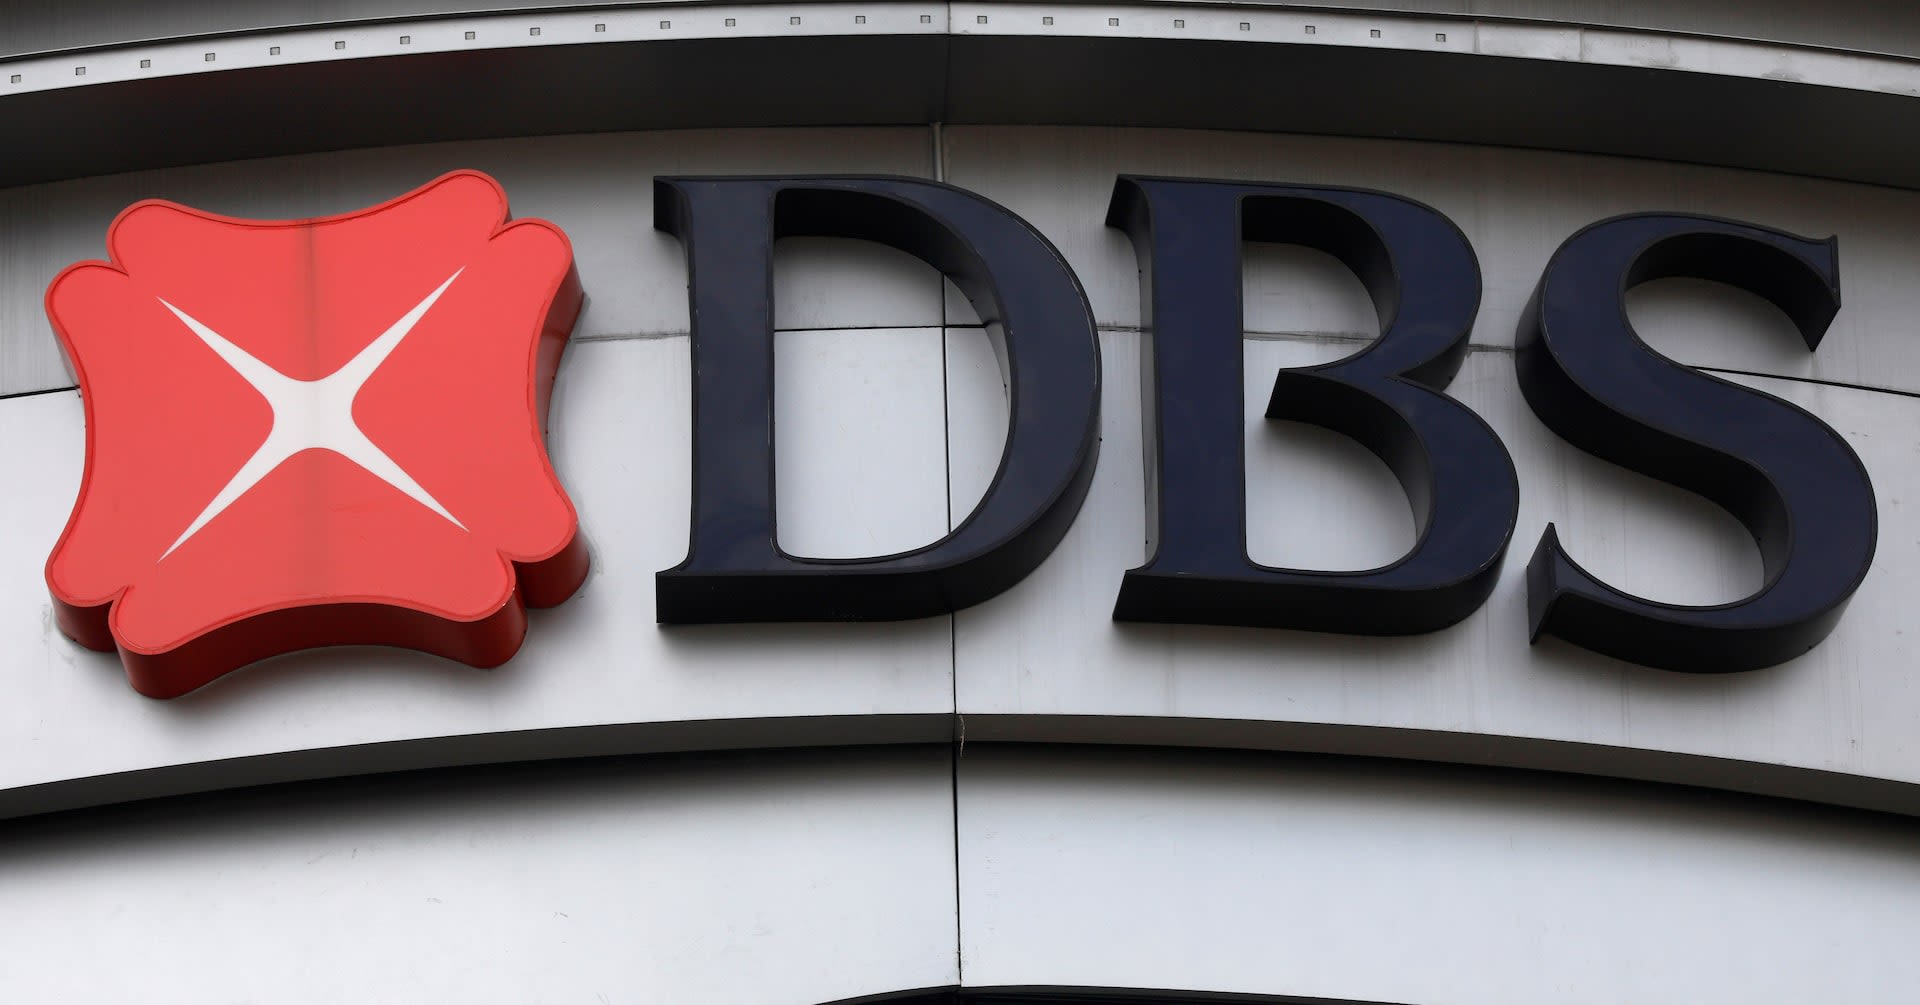 DBS quarterly results trounce forecasts, another record year expected